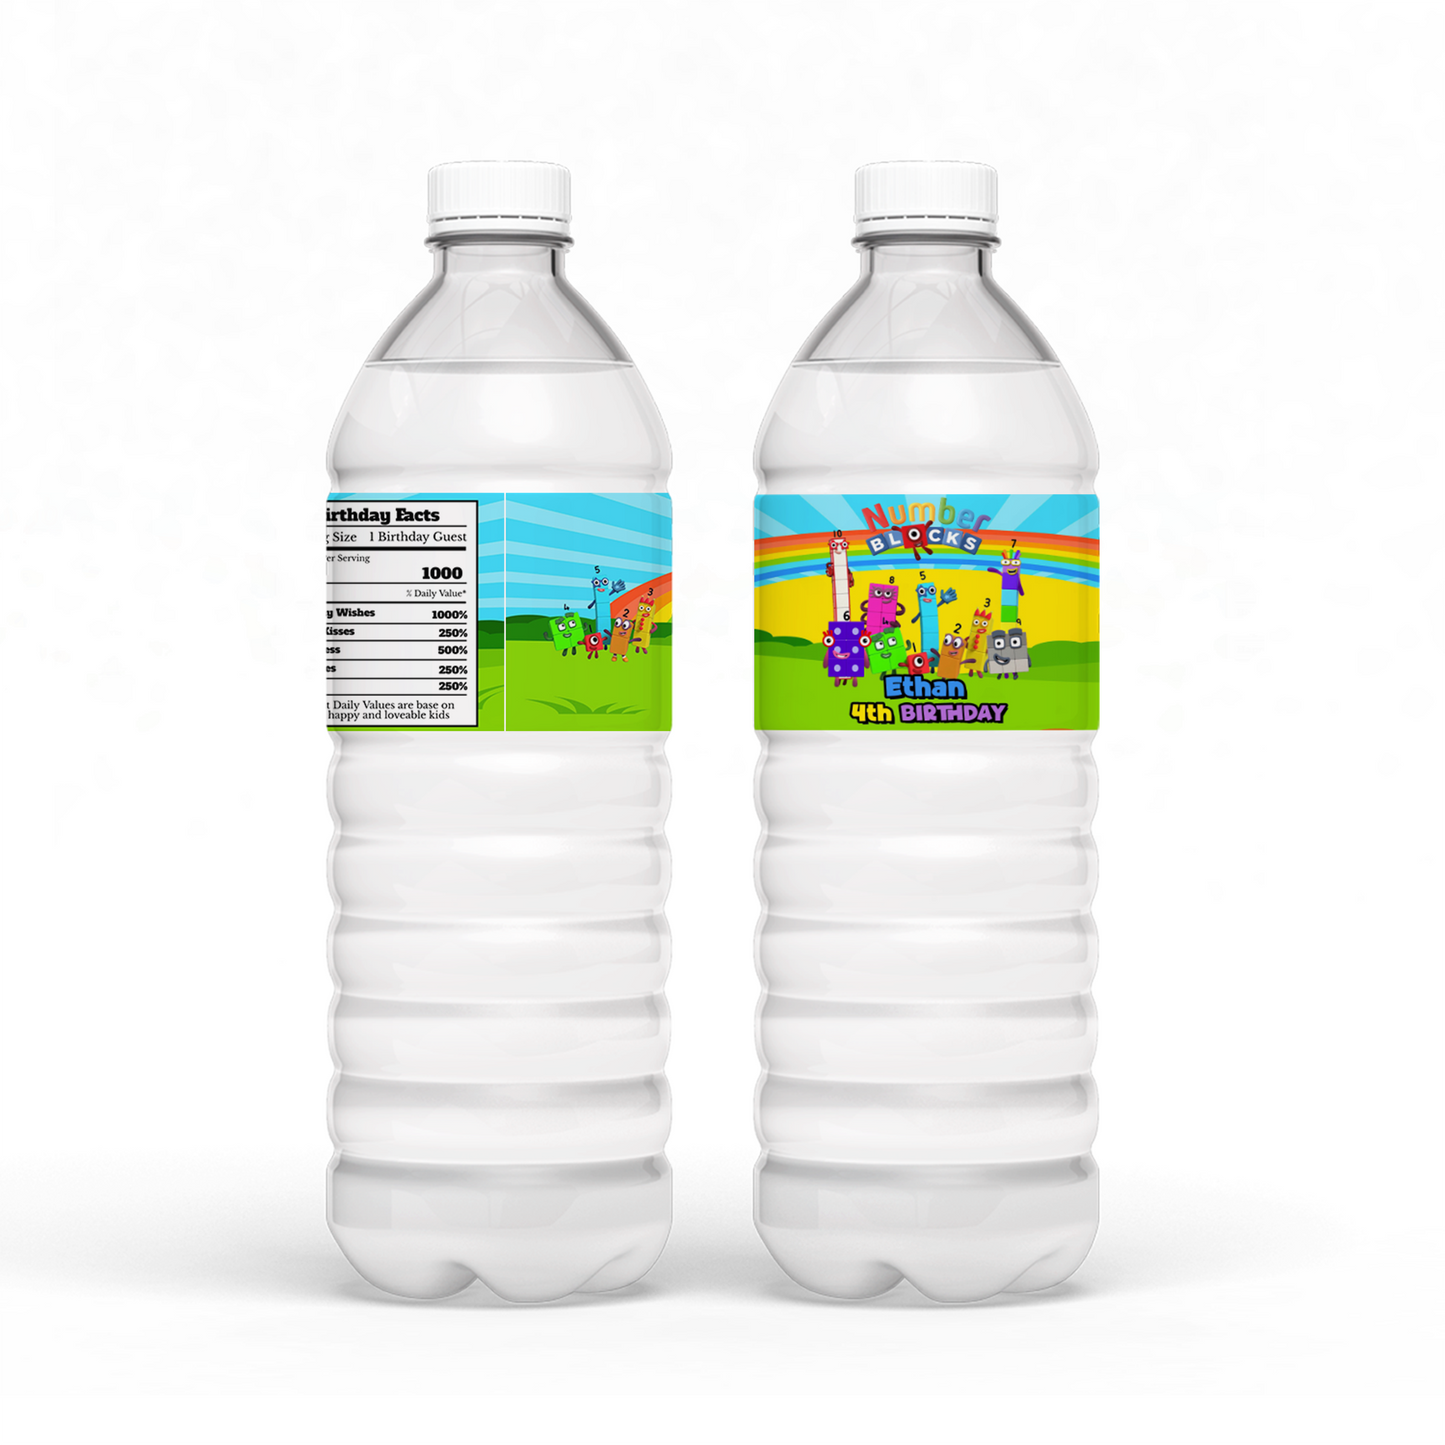 Personalized Water Bottle Labels with NumberBlocks Theme